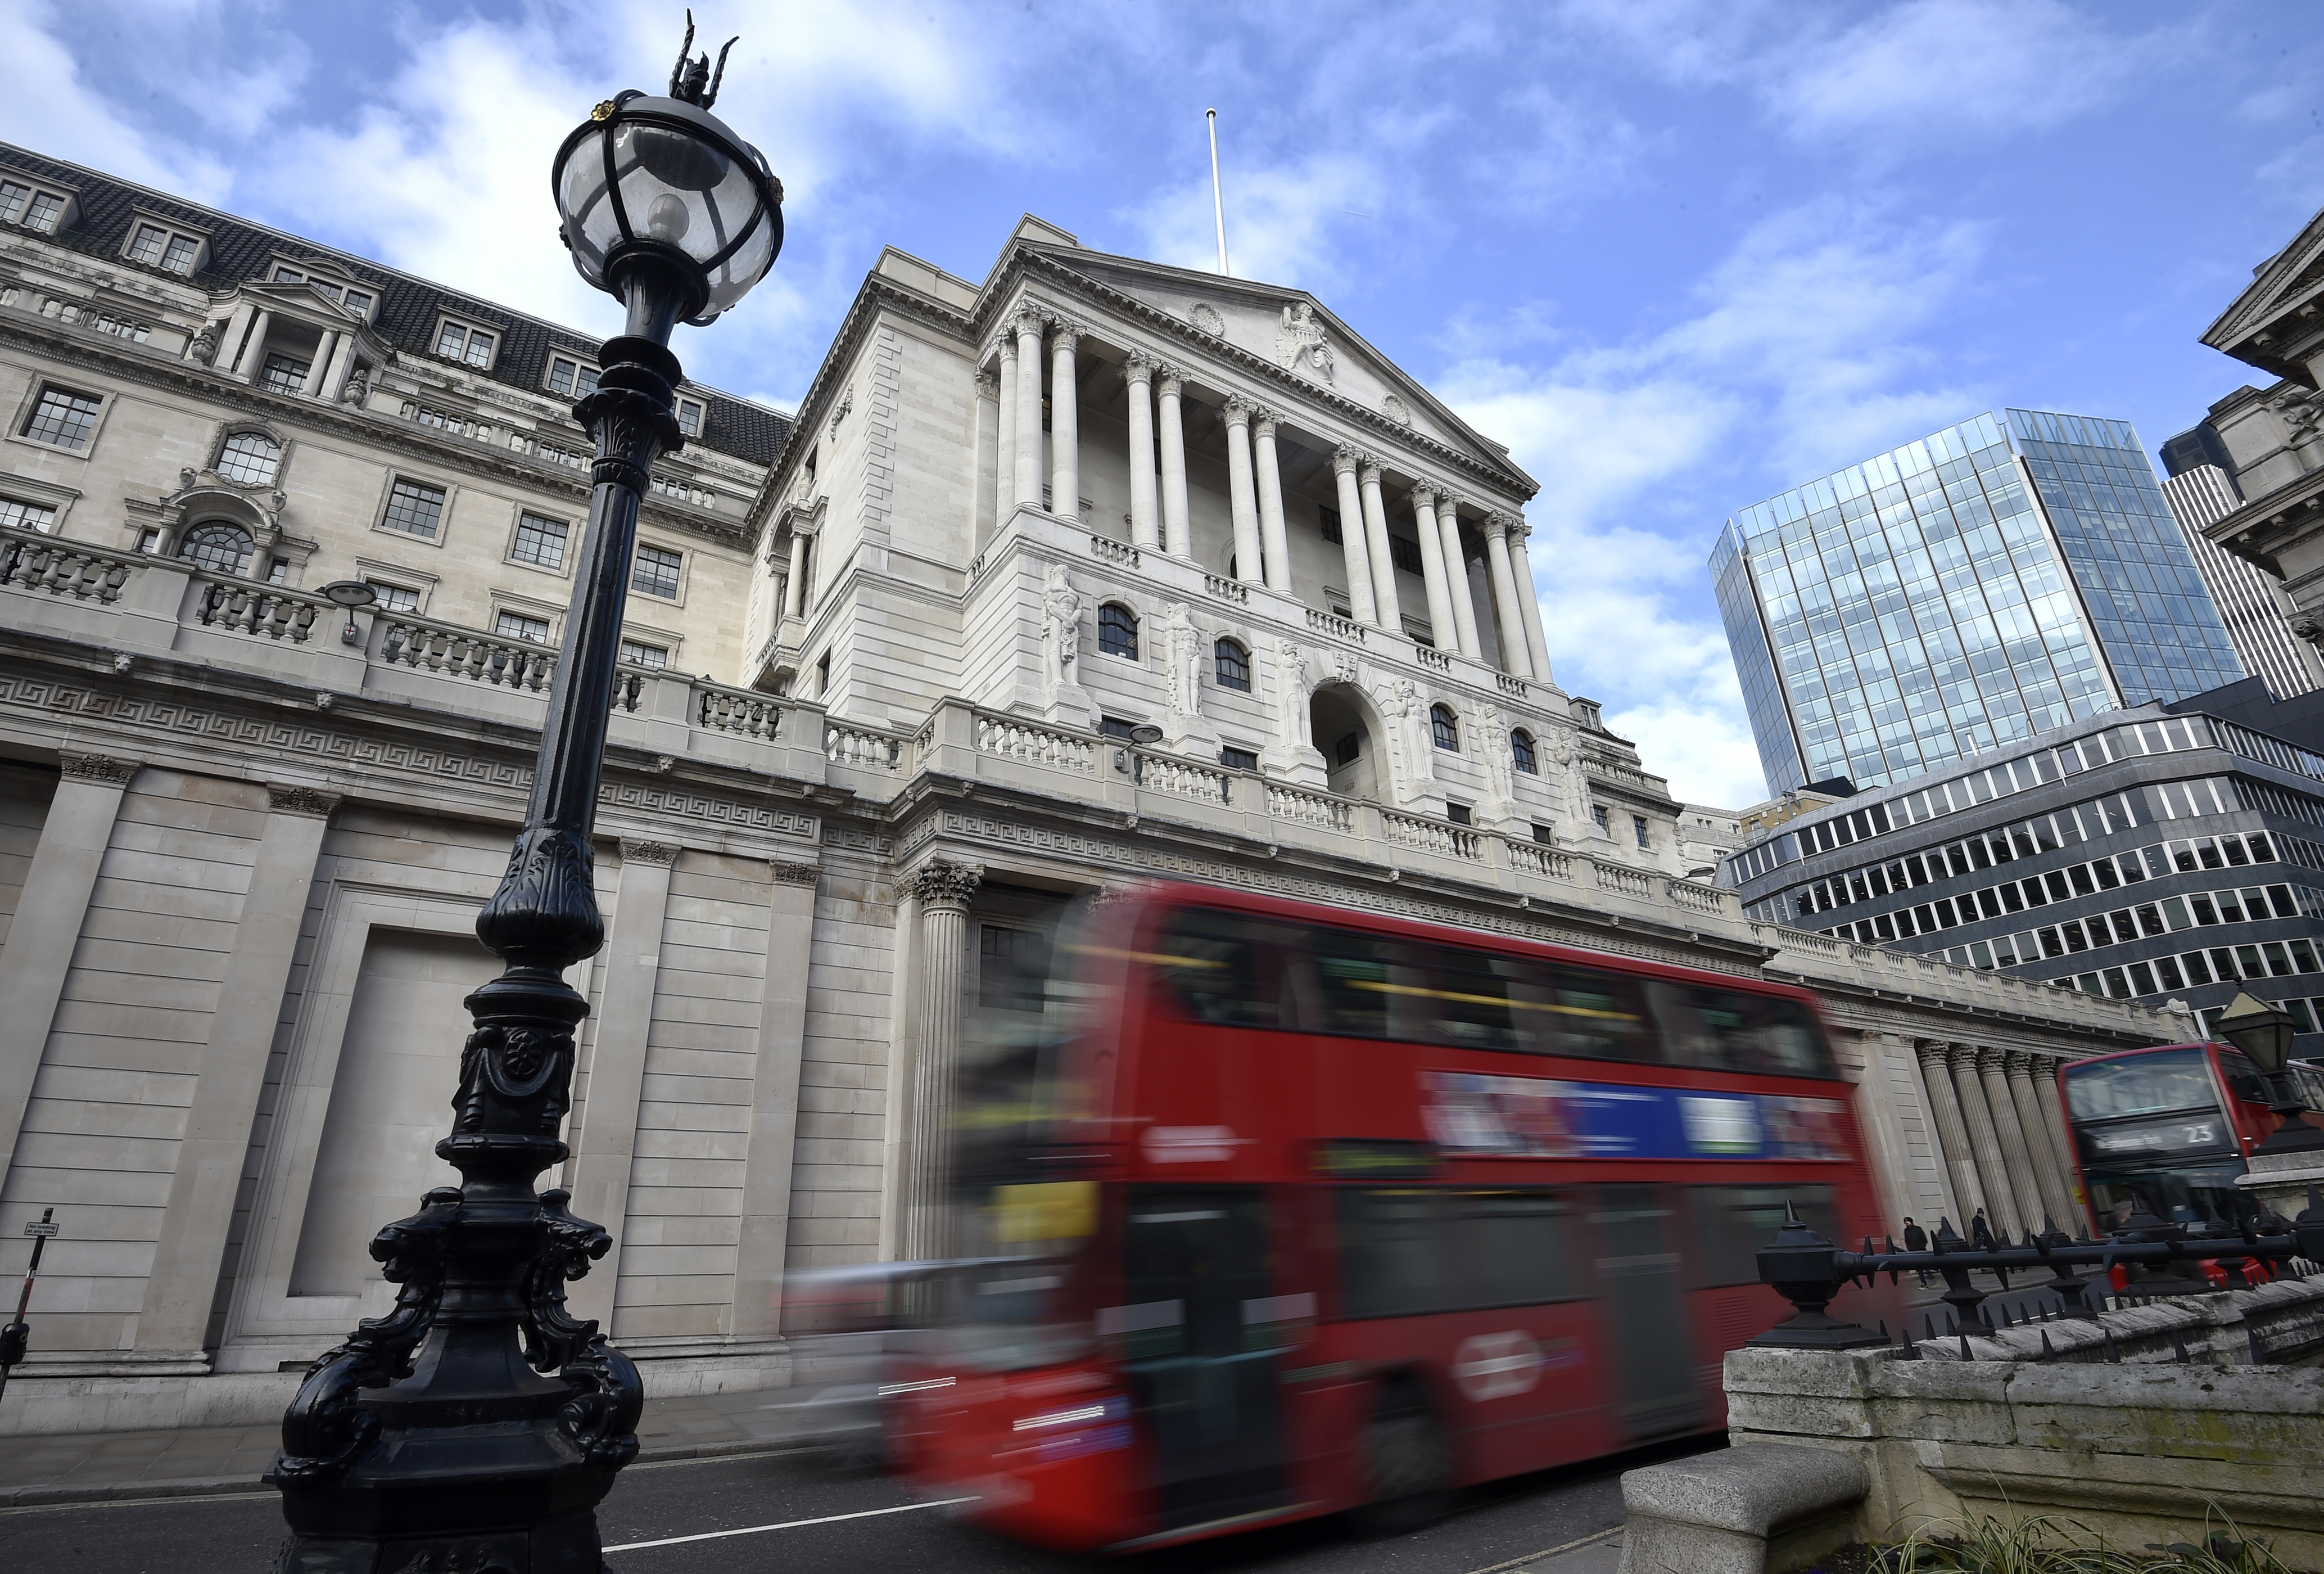 A bus passes the Bank of England in the City of London